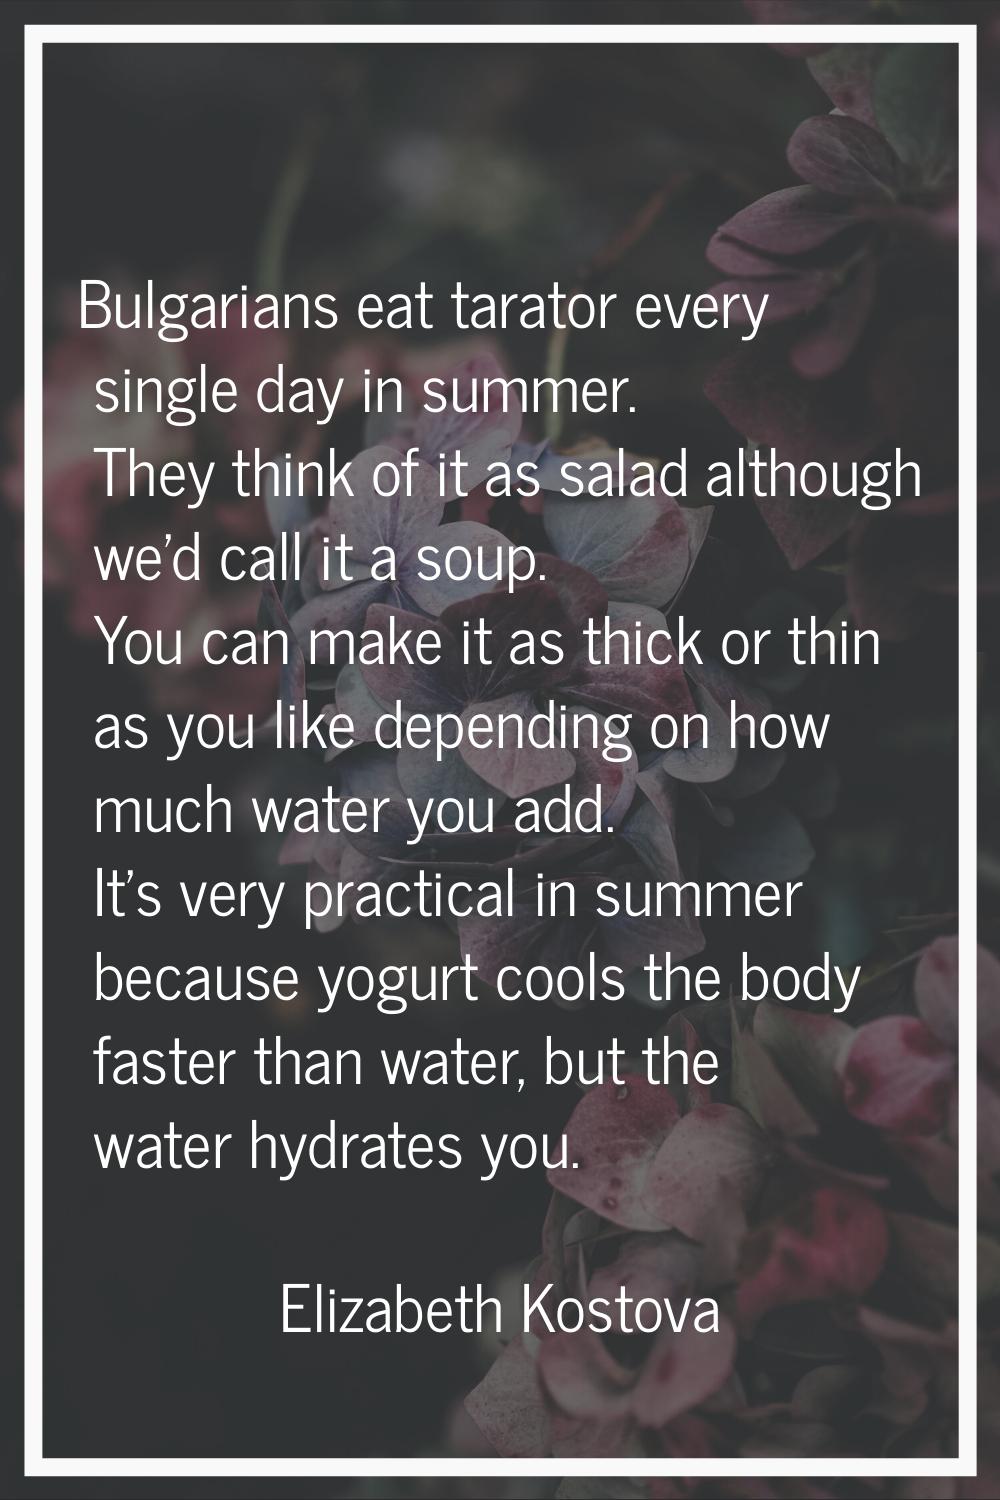 Bulgarians eat tarator every single day in summer. They think of it as salad although we'd call it 